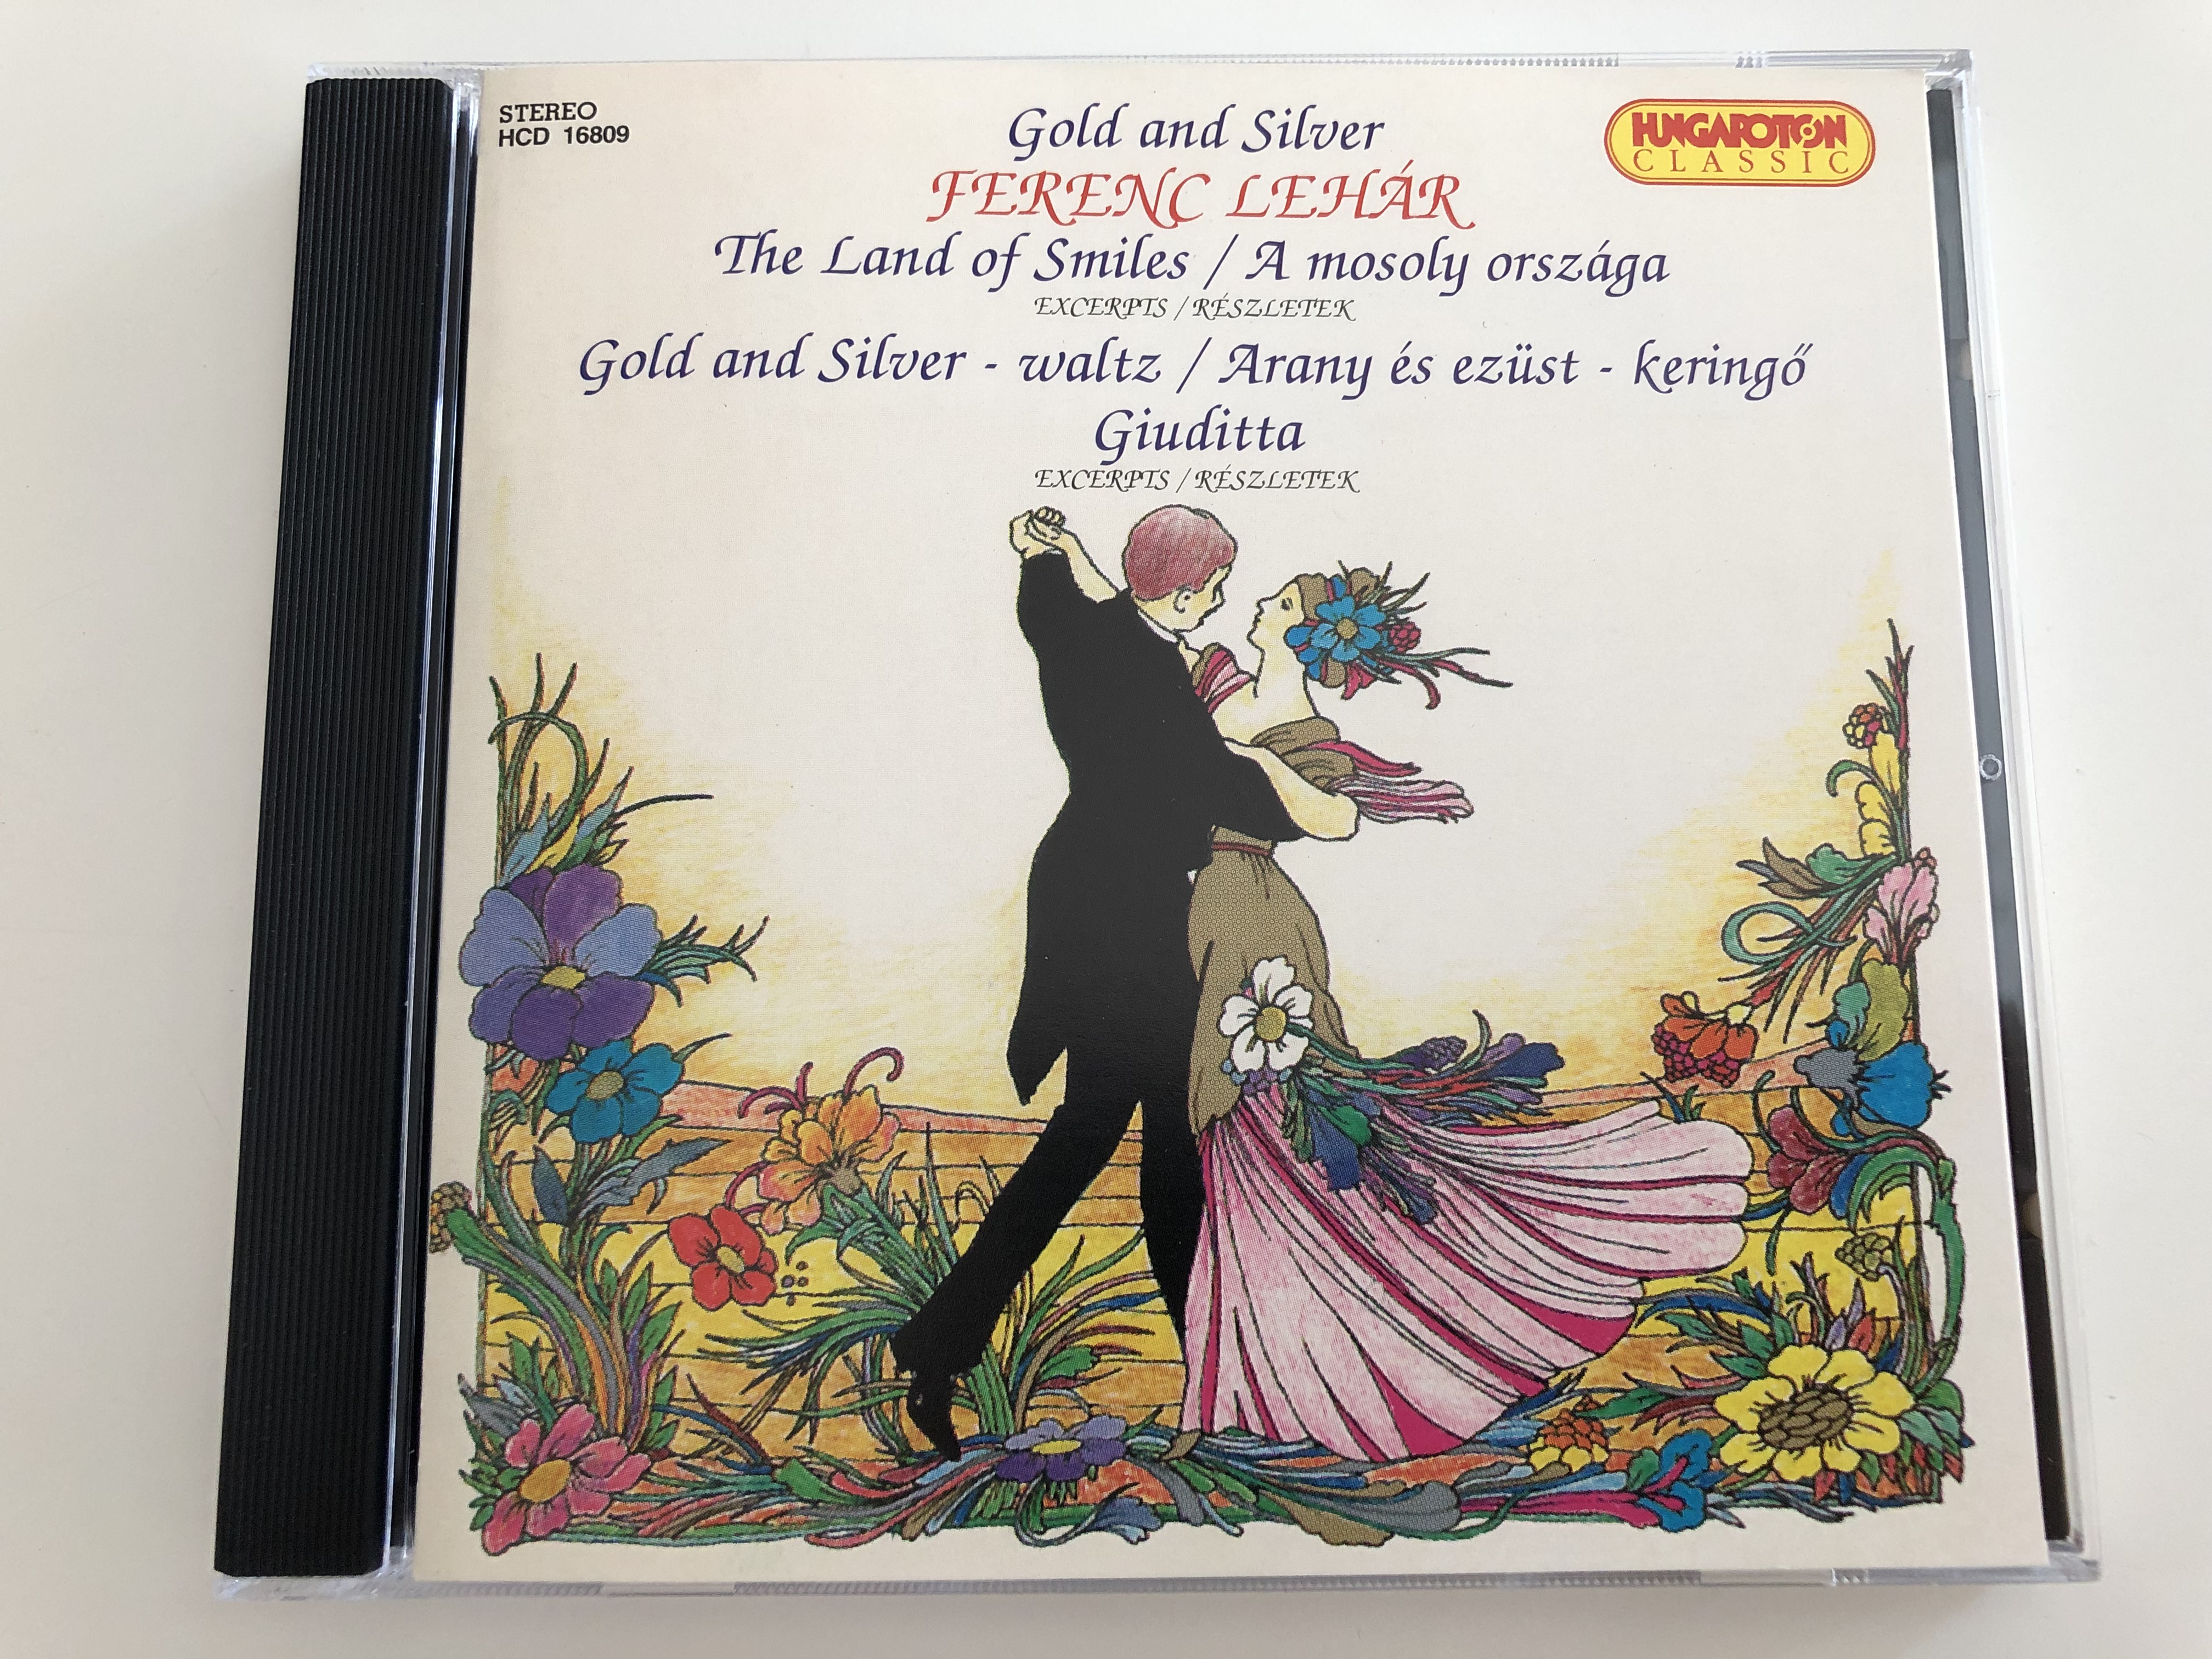 ferenc-leh-r-gold-and-silver-the-land-of-smiles-excerpts-gold-and-silver-waltz-arany-s-ez-st-kering-giuditta-excerpts-hungaroton-classic-audio-cd-1995-hcd-16809-1-.jpg